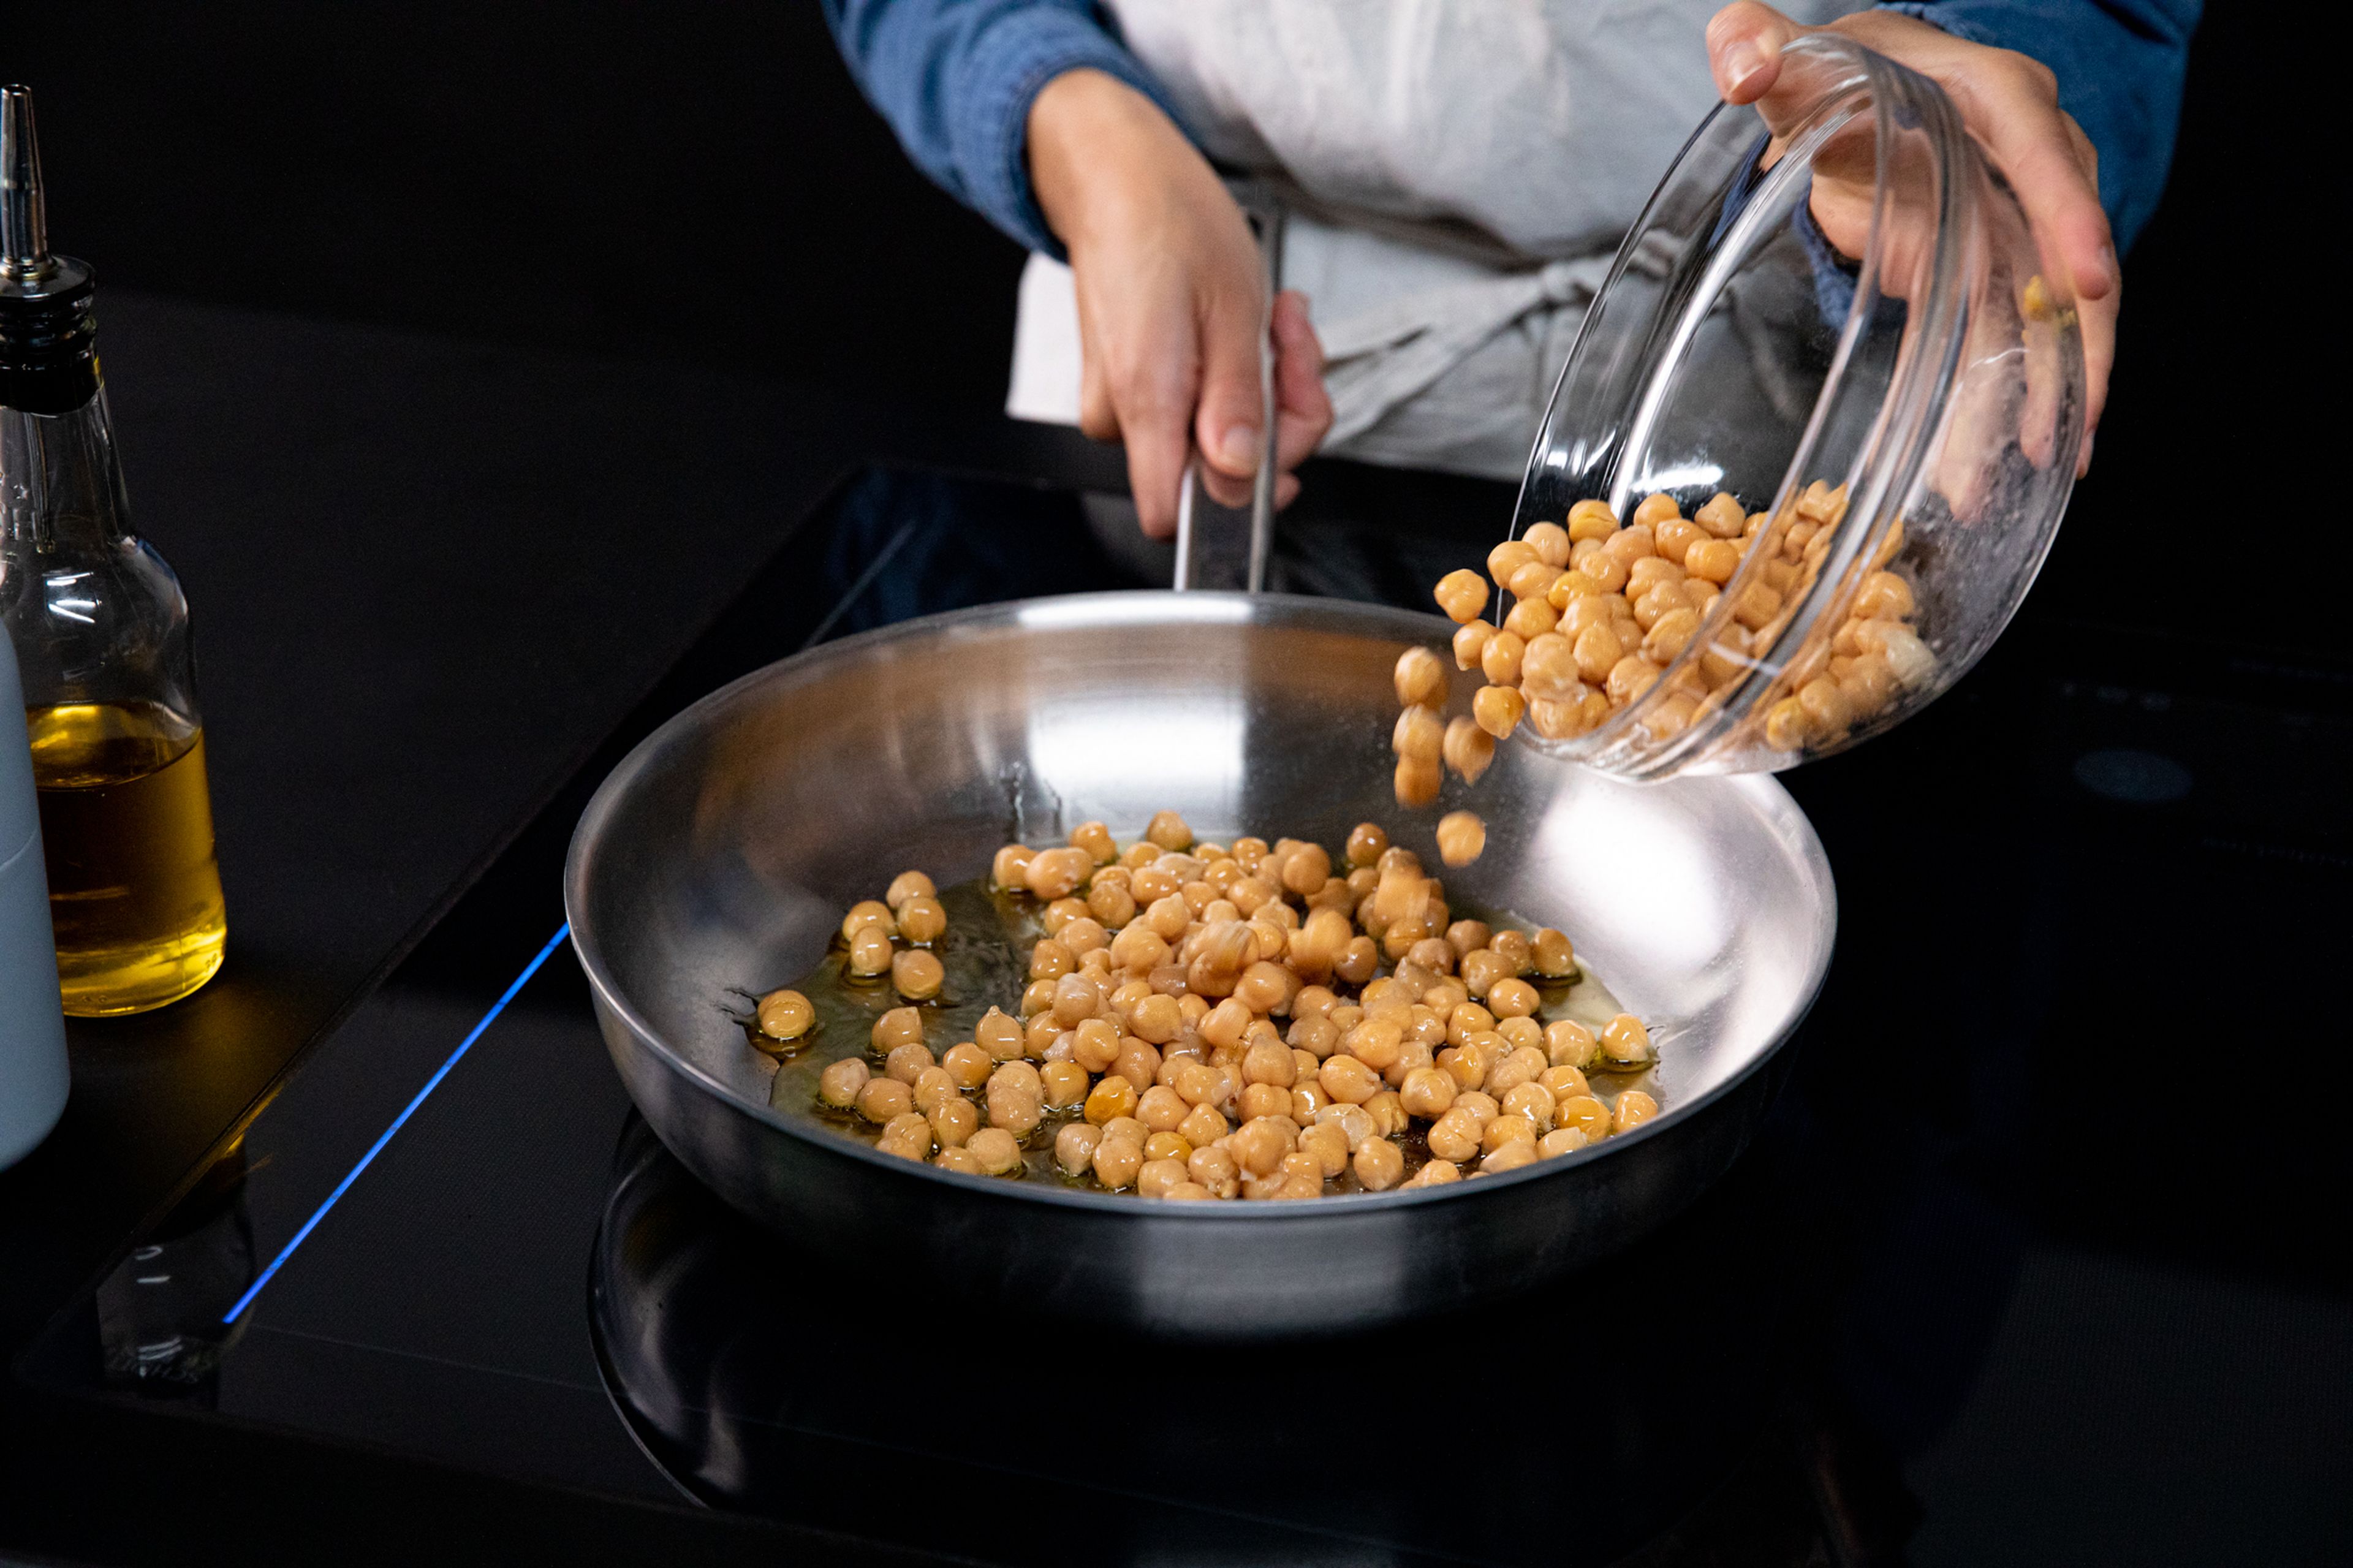 Set a frying pan over medium heat and add some oil. Add drained chickpeas and fry until slightly browned, approx. 5 - 7 min. Season with salt and pepper. Divide the chickpeas equally into two bowls. Mash one bowl of chickpeas well with a fork. Add some olive oil, tahini, and lemon juice to the mashed chickpeas, and mix well to combine.